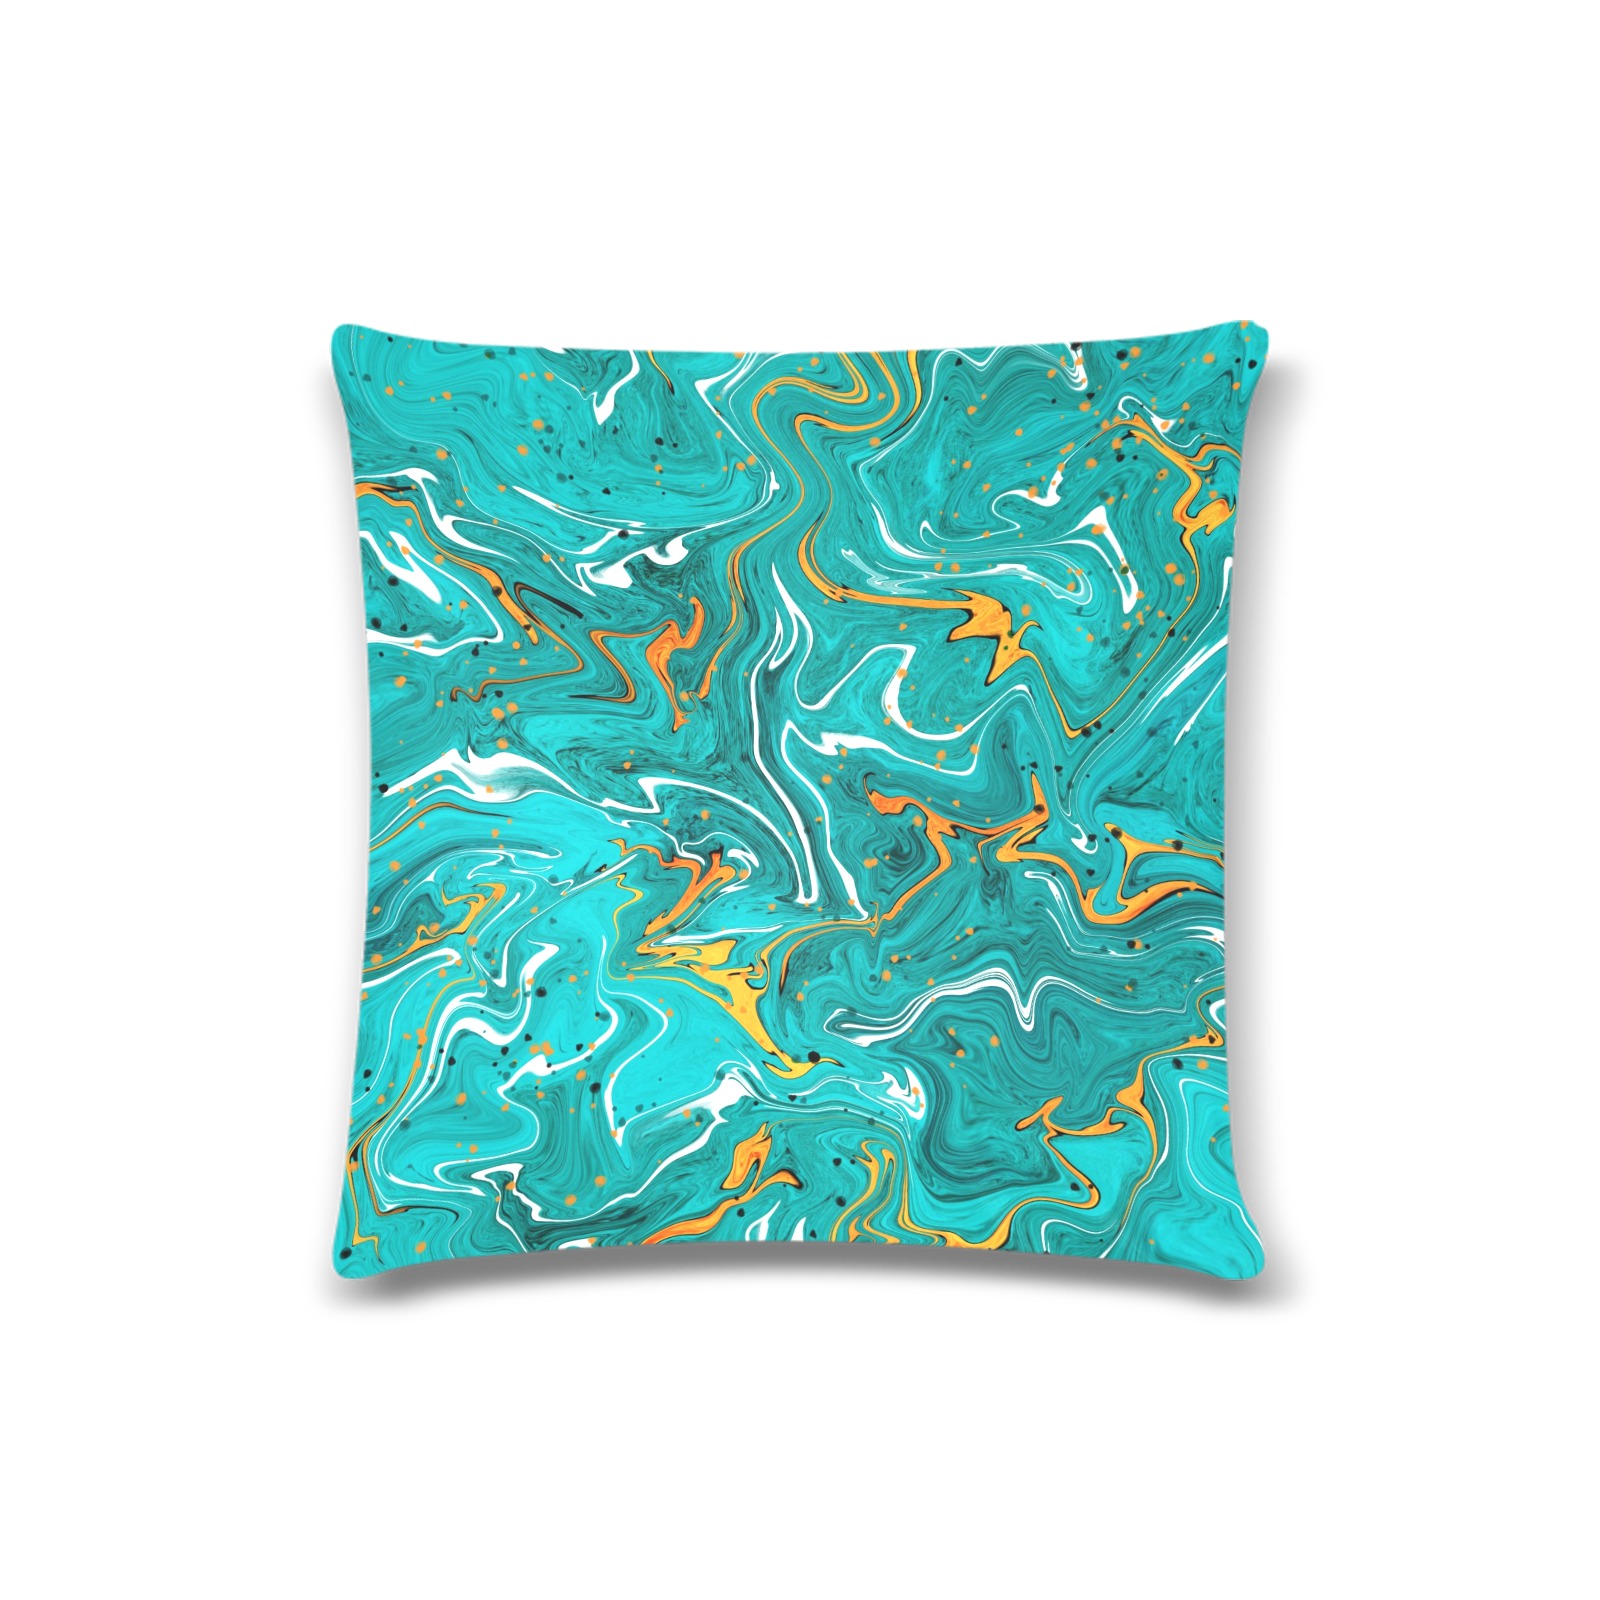 Turquoise and orange marbled art Custom Zippered Pillow Case 16"x16"(Twin Sides)